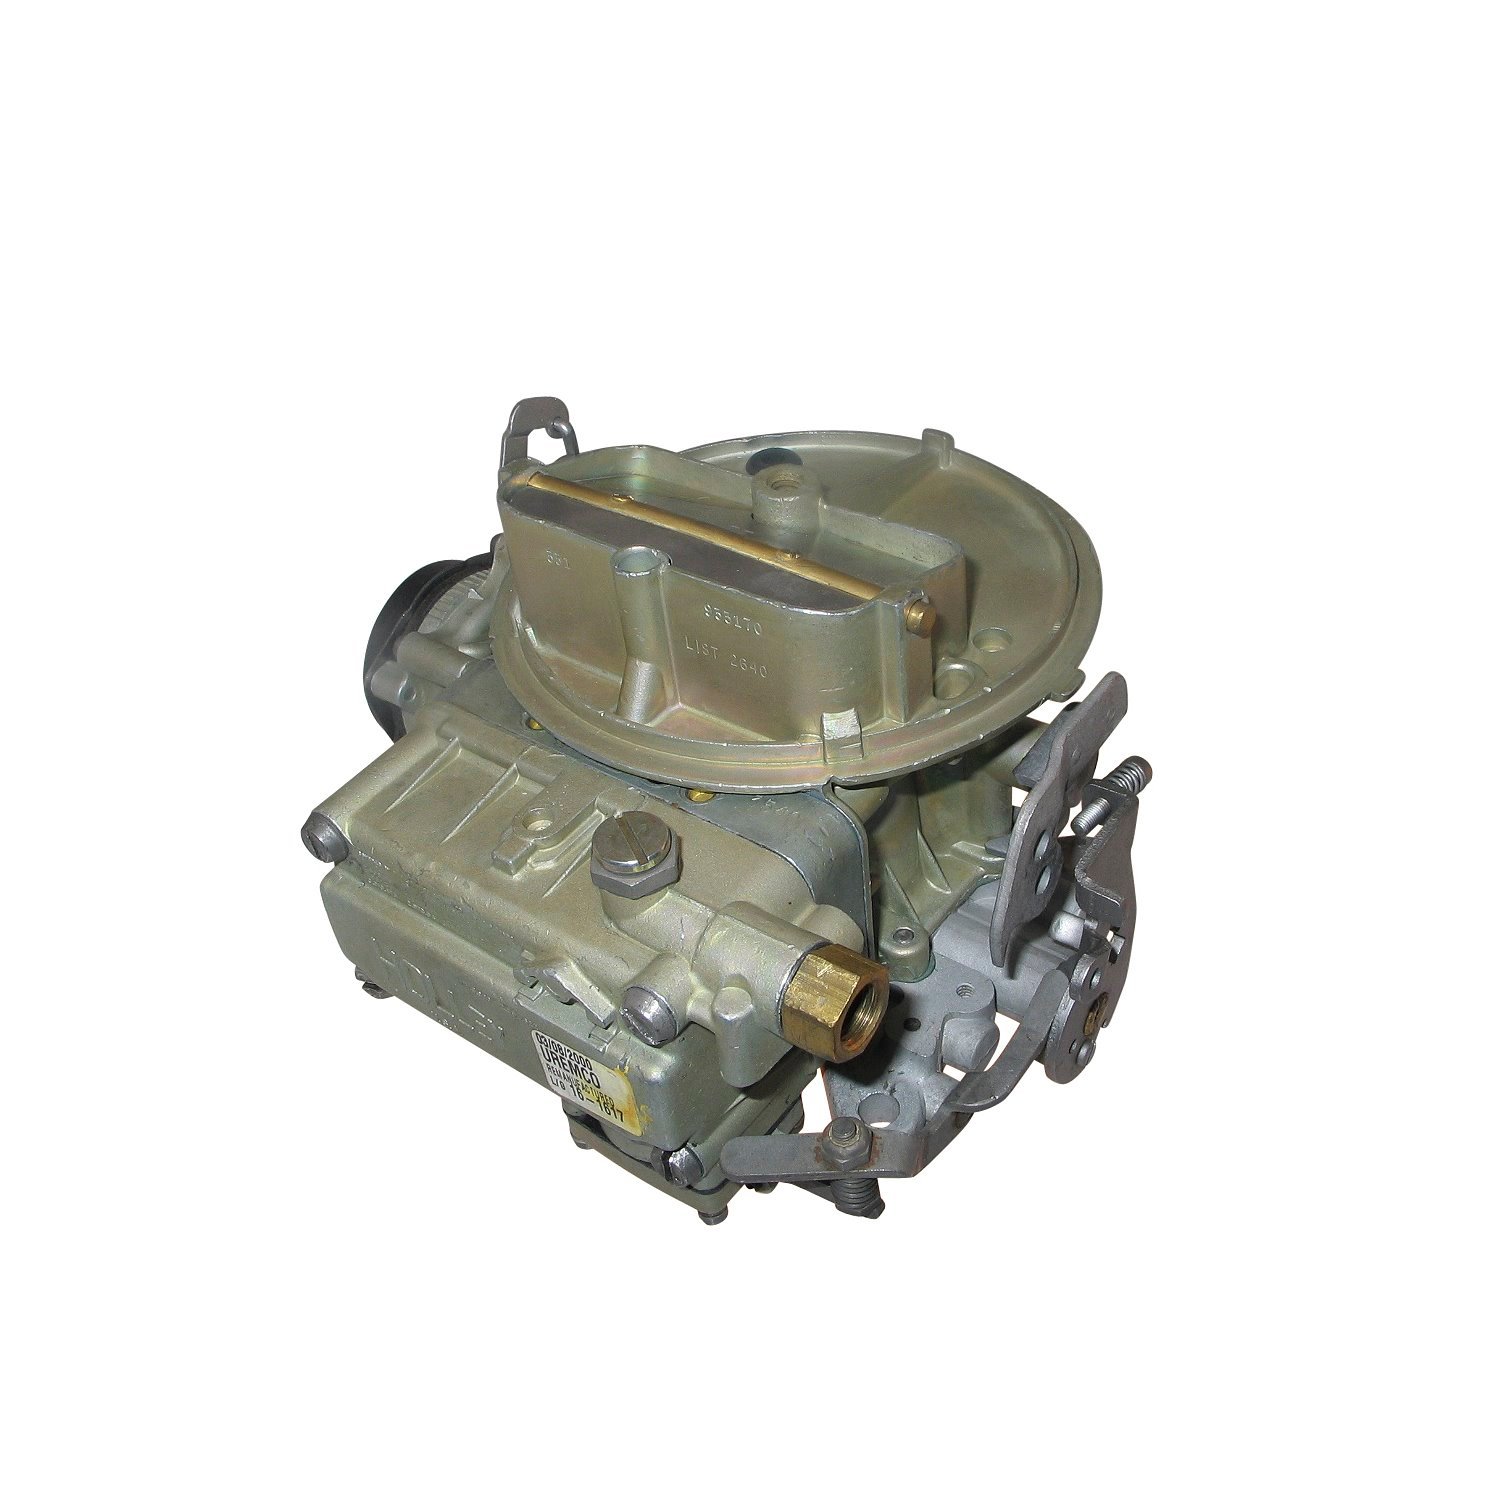 16-1617 Holley Remanufactured Carburetor, 2300-Style